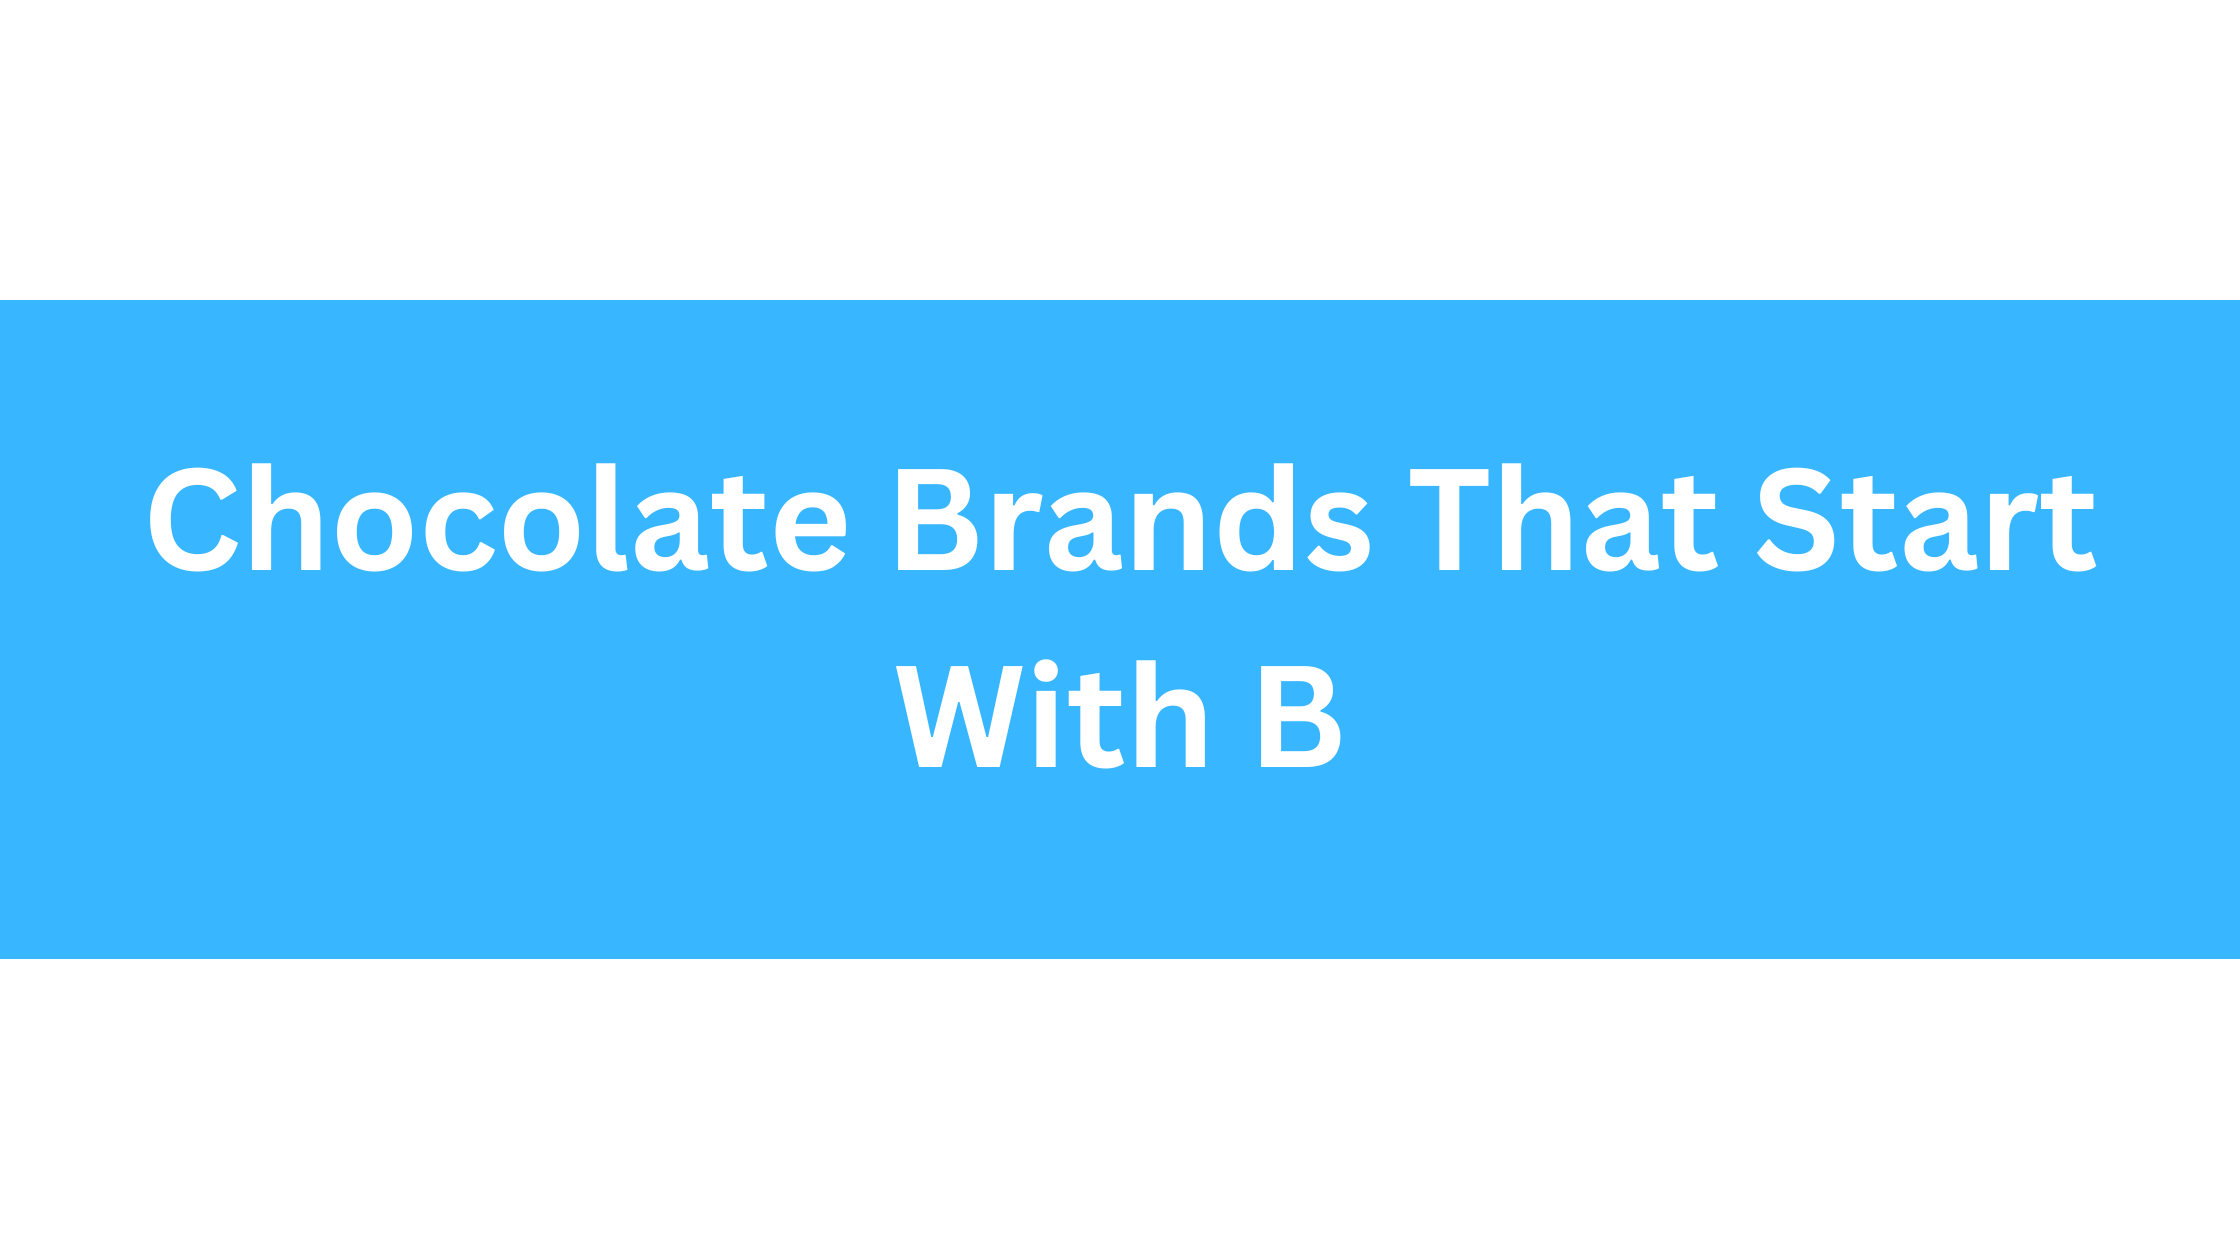 Chocolate Brands That Start With B